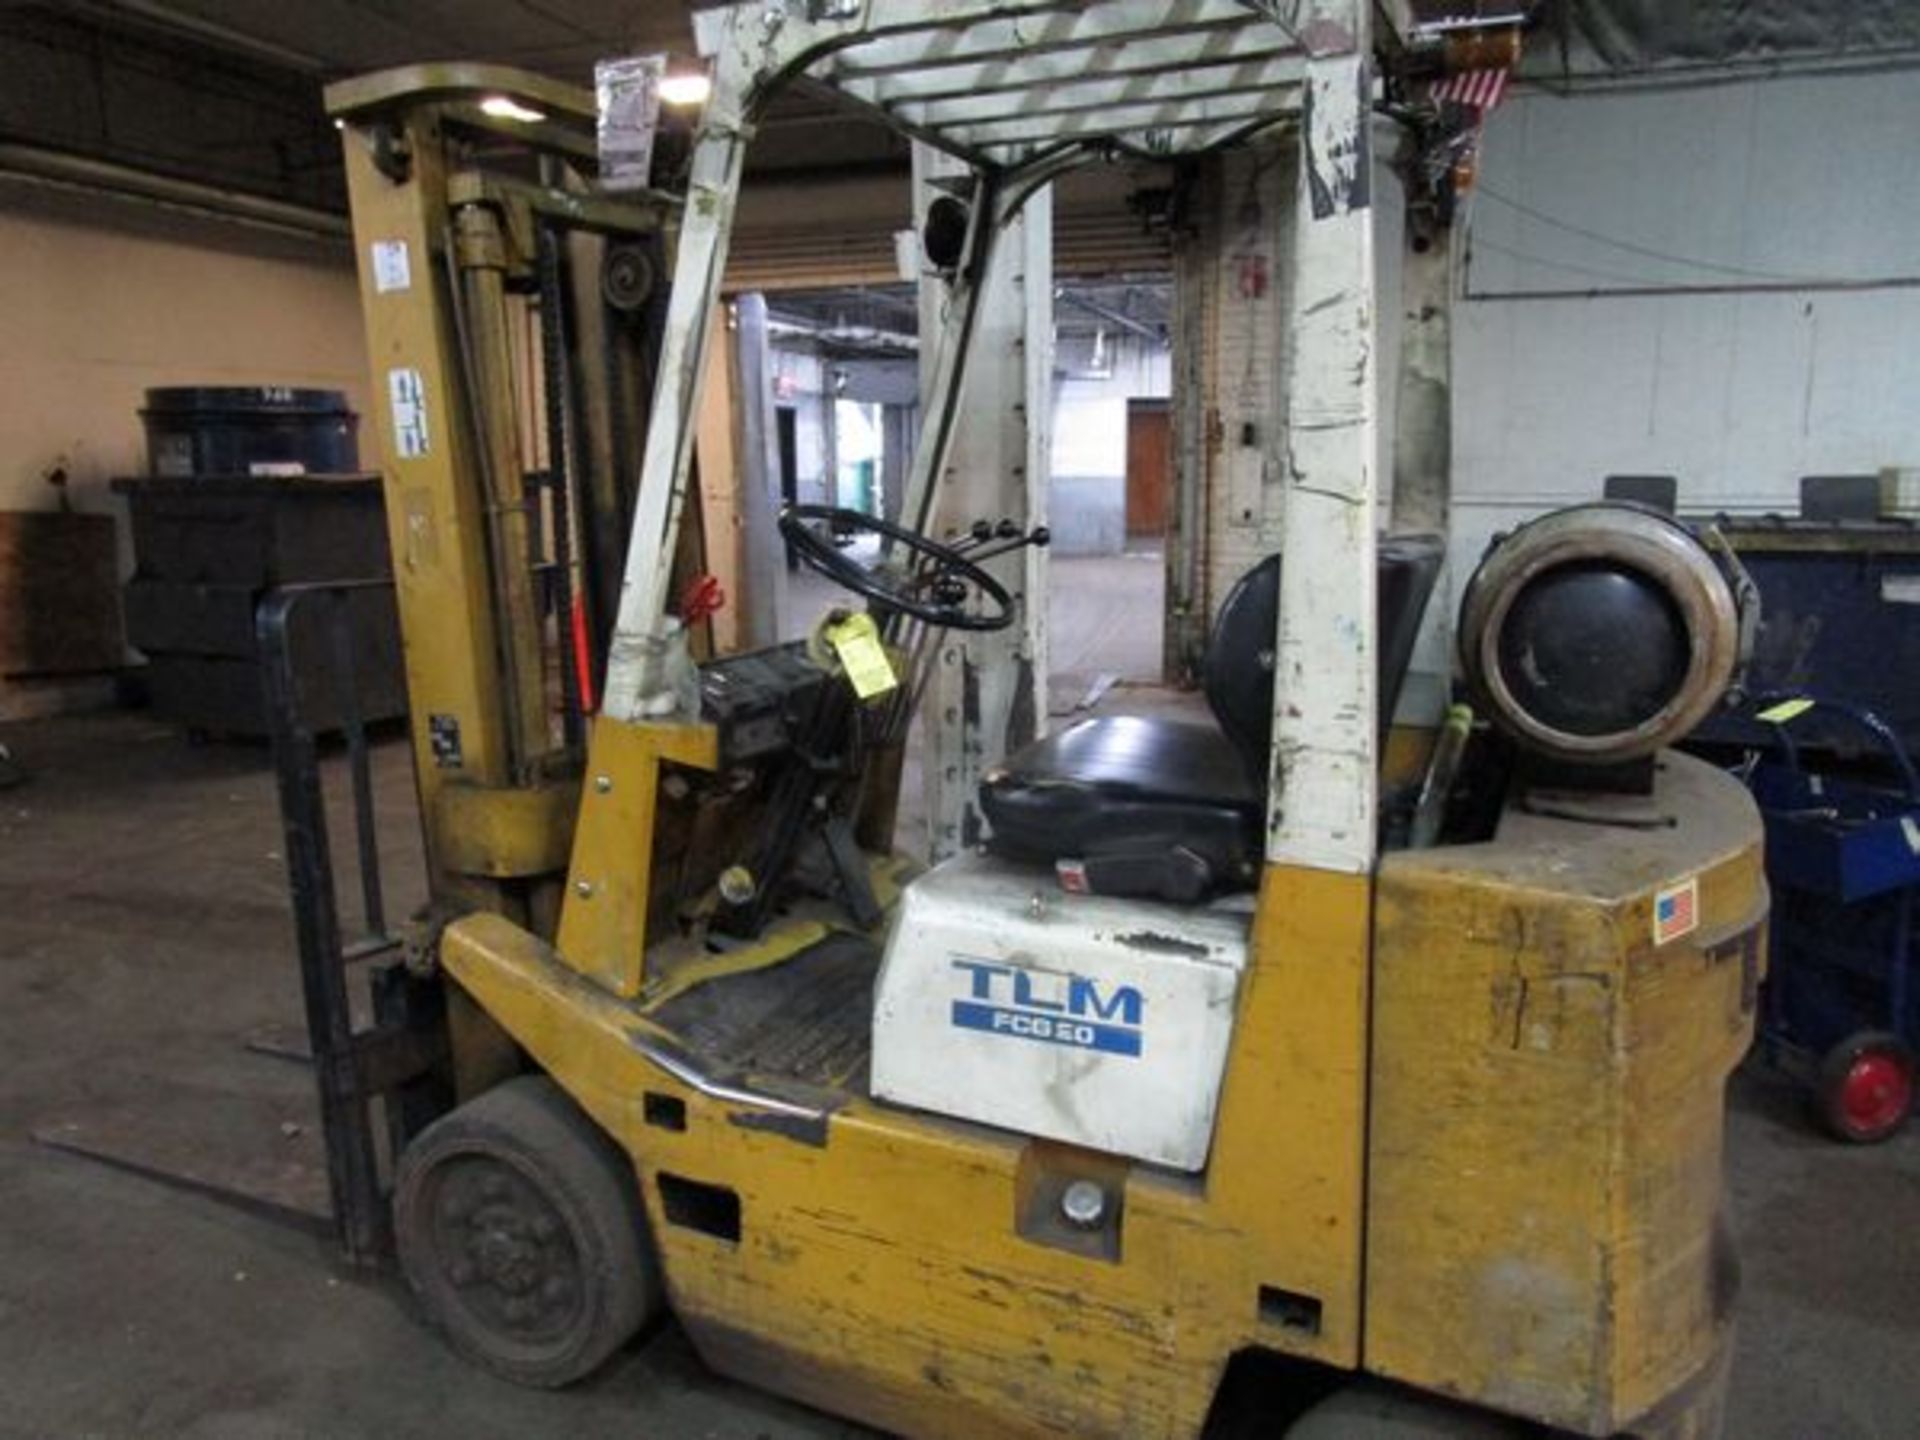 TCM FCG N6 LPG Forklift, s/n 49000175, 4000 Lb., 9797 Hrs. (Located in W. Springfield, MA) (LATE